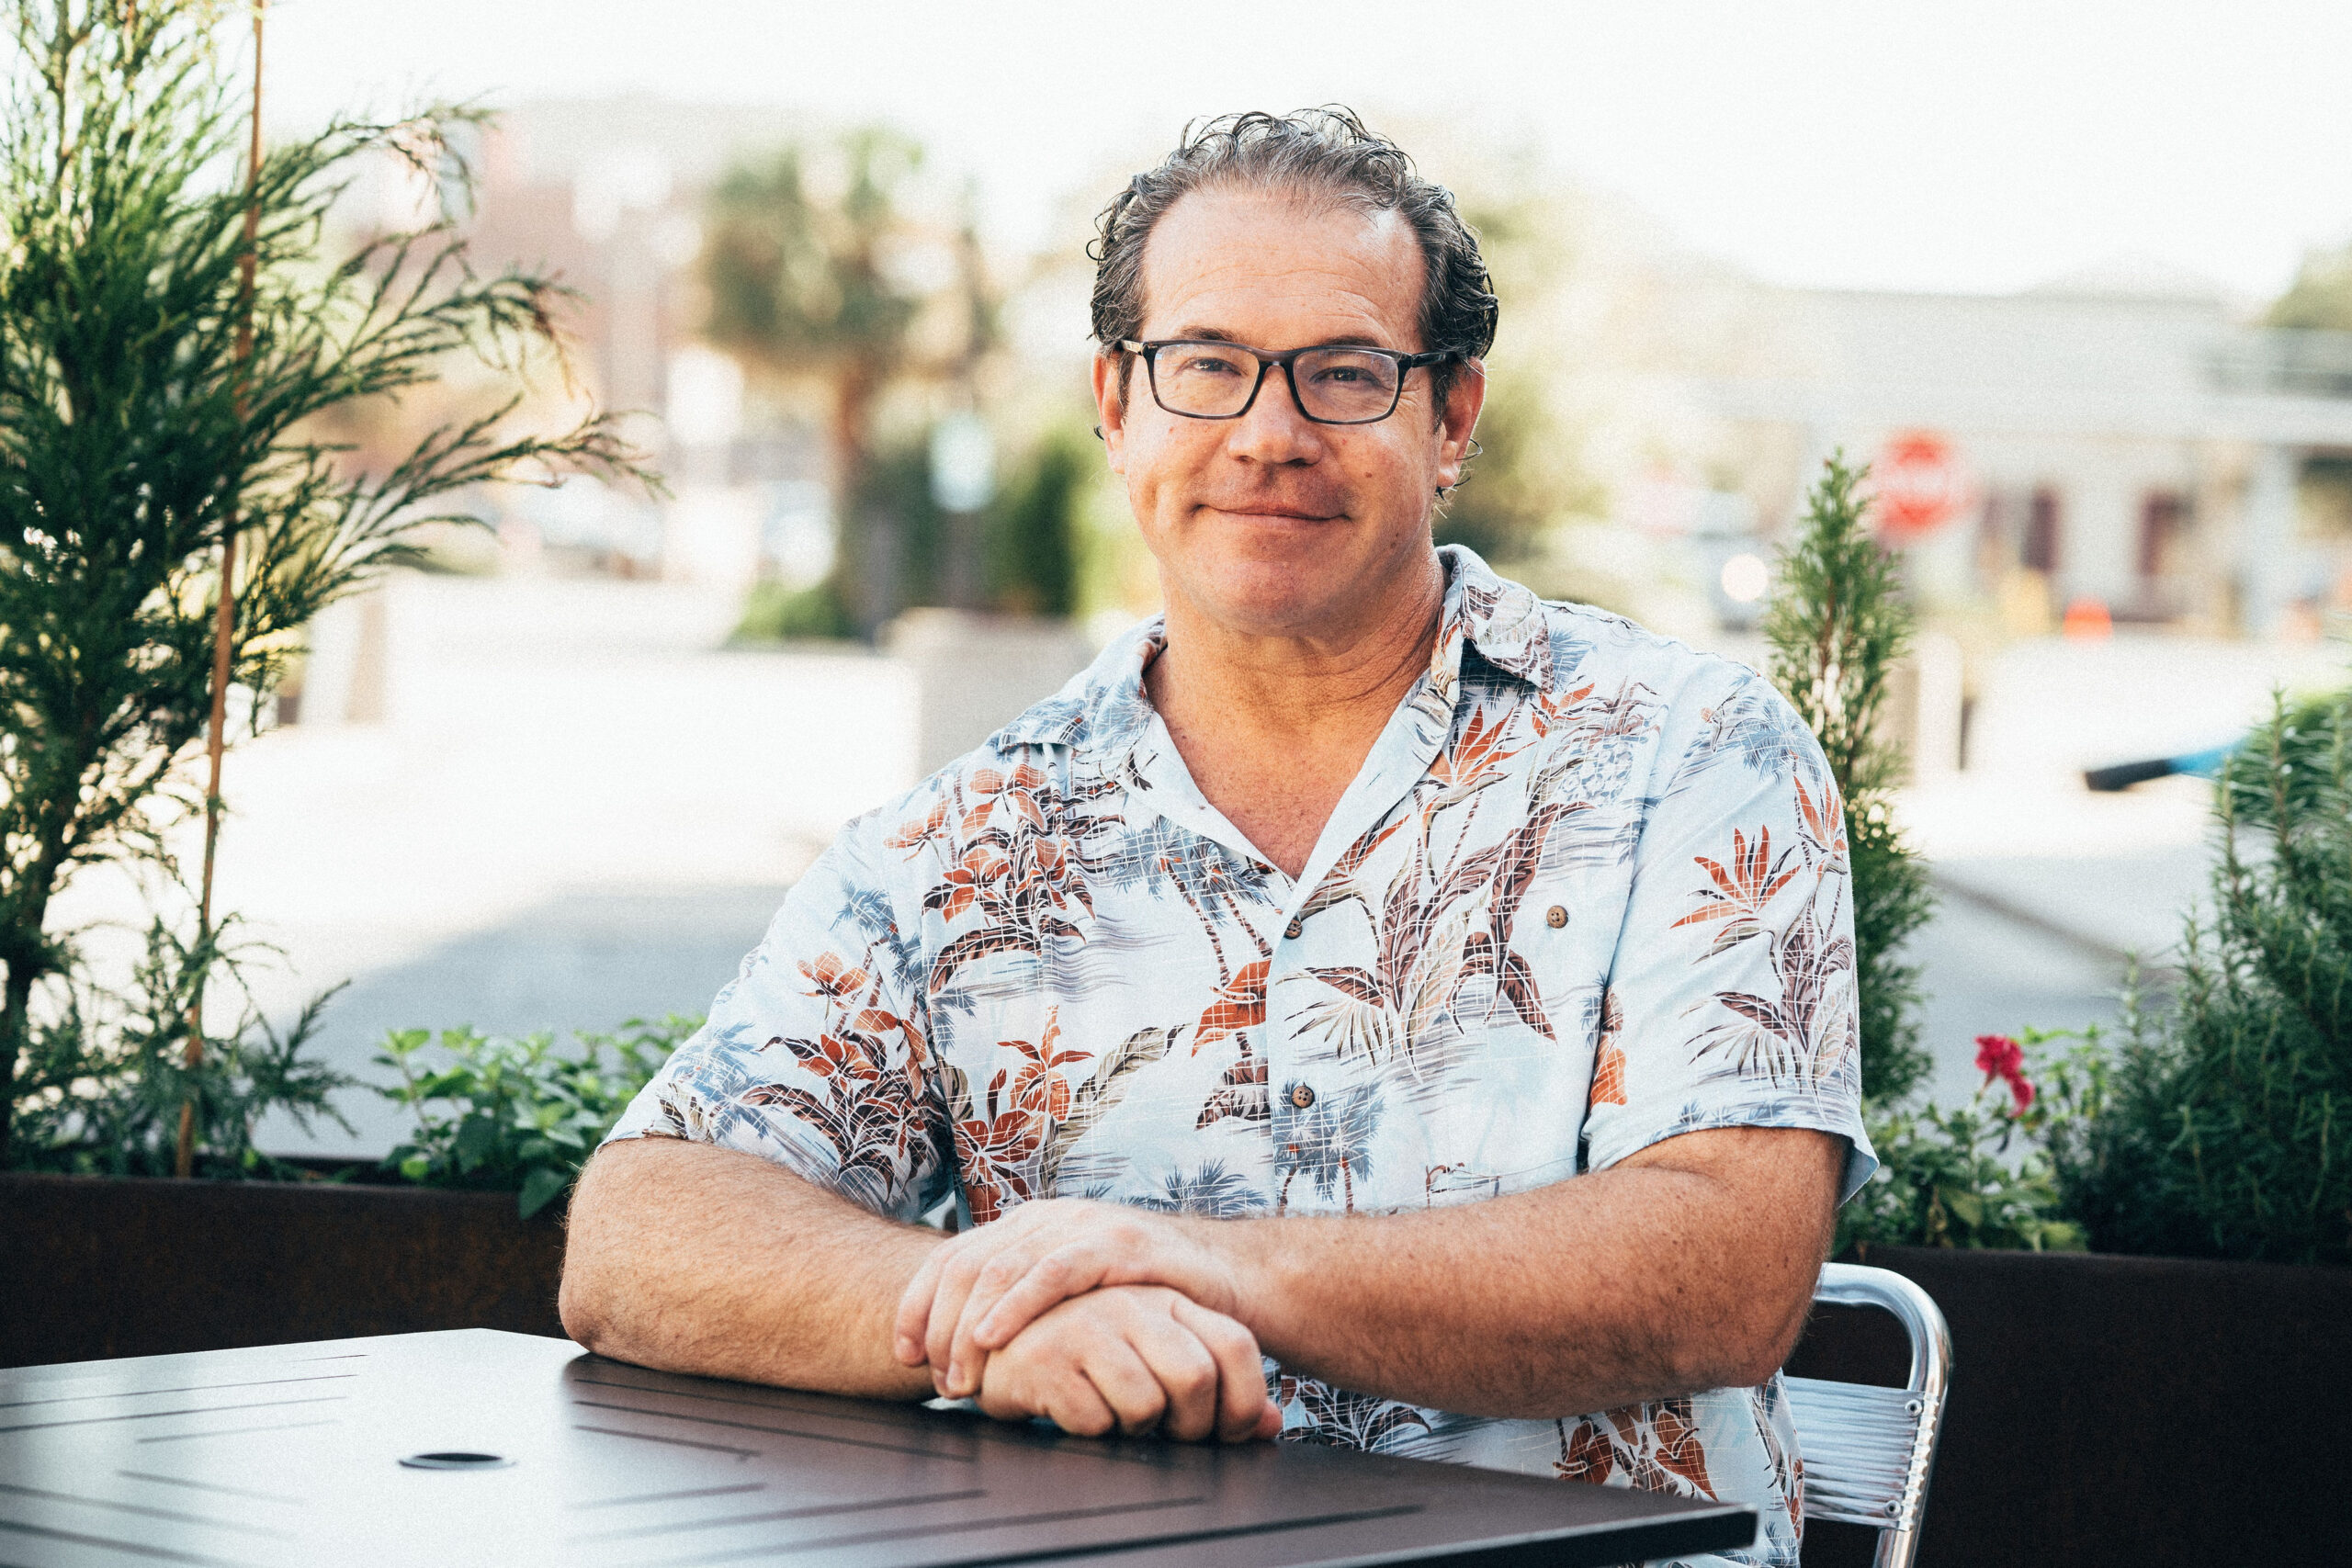 General Manager of The Wine Bar on Palafox, Rick Farro